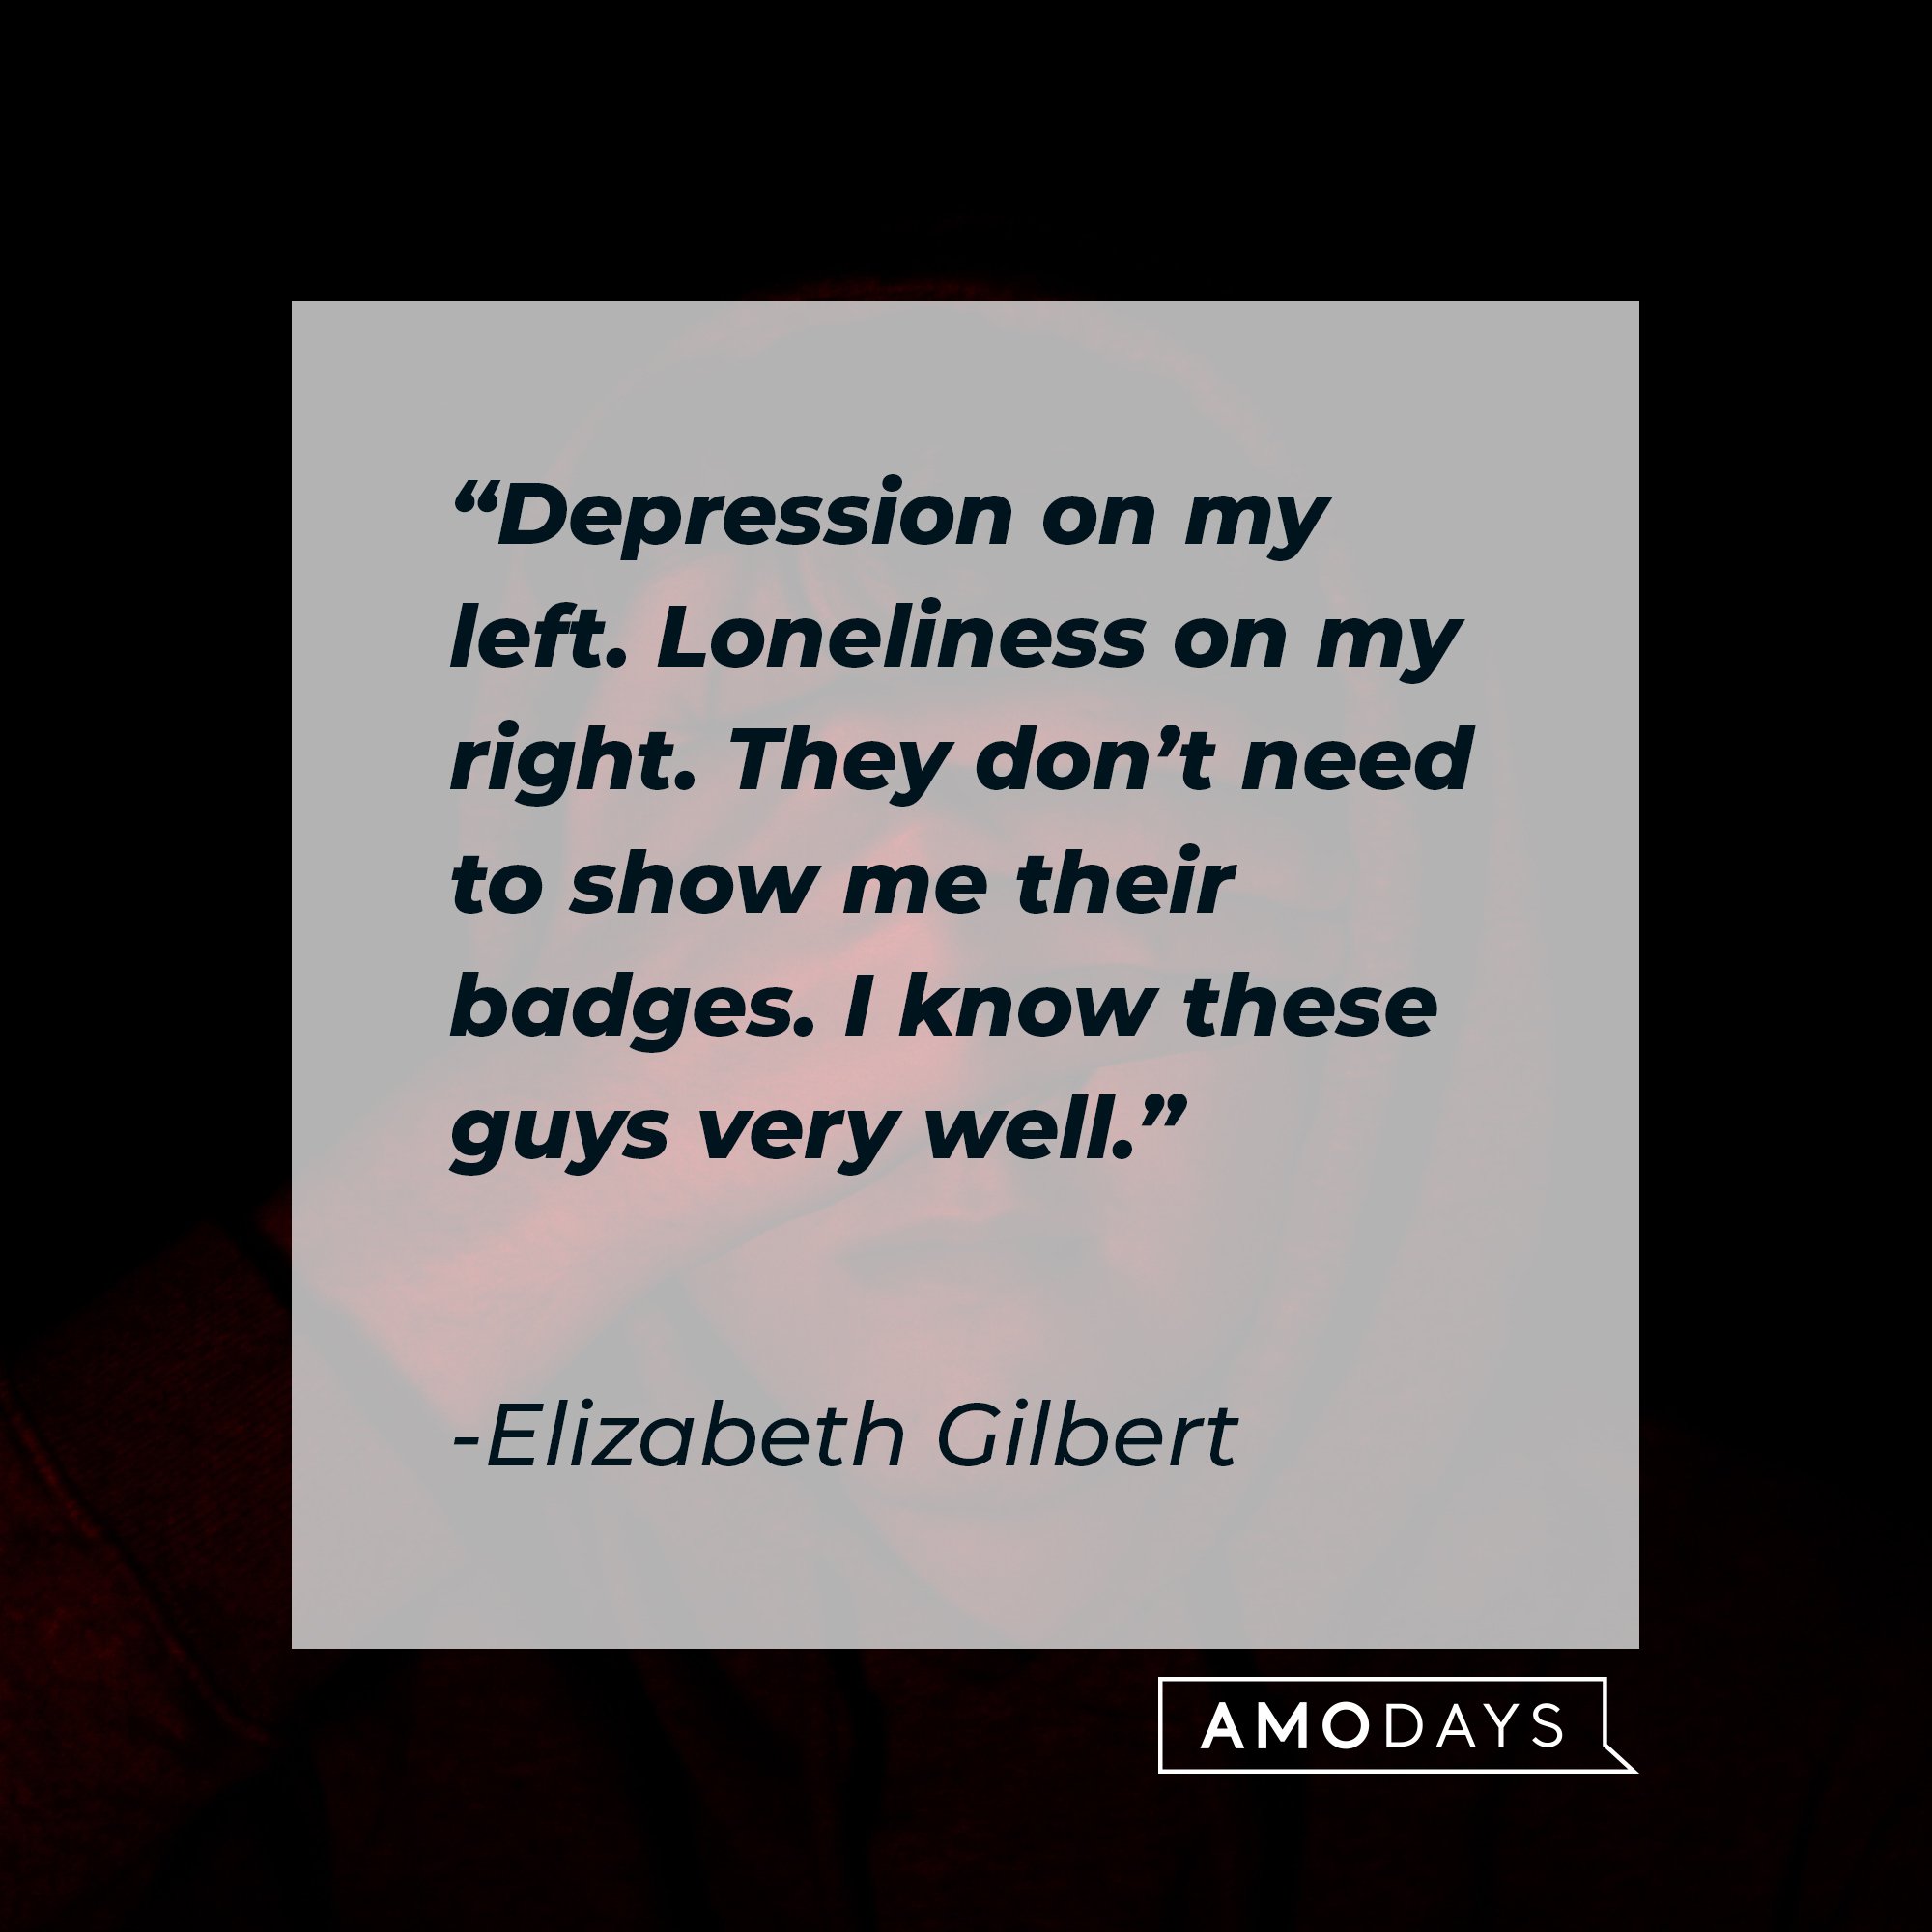 Elizabeth Gilbert's quote: "Depression on my left. Loneliness on my right. They don't need to show me their badges. I know these guys very well." | Image: AmoDays